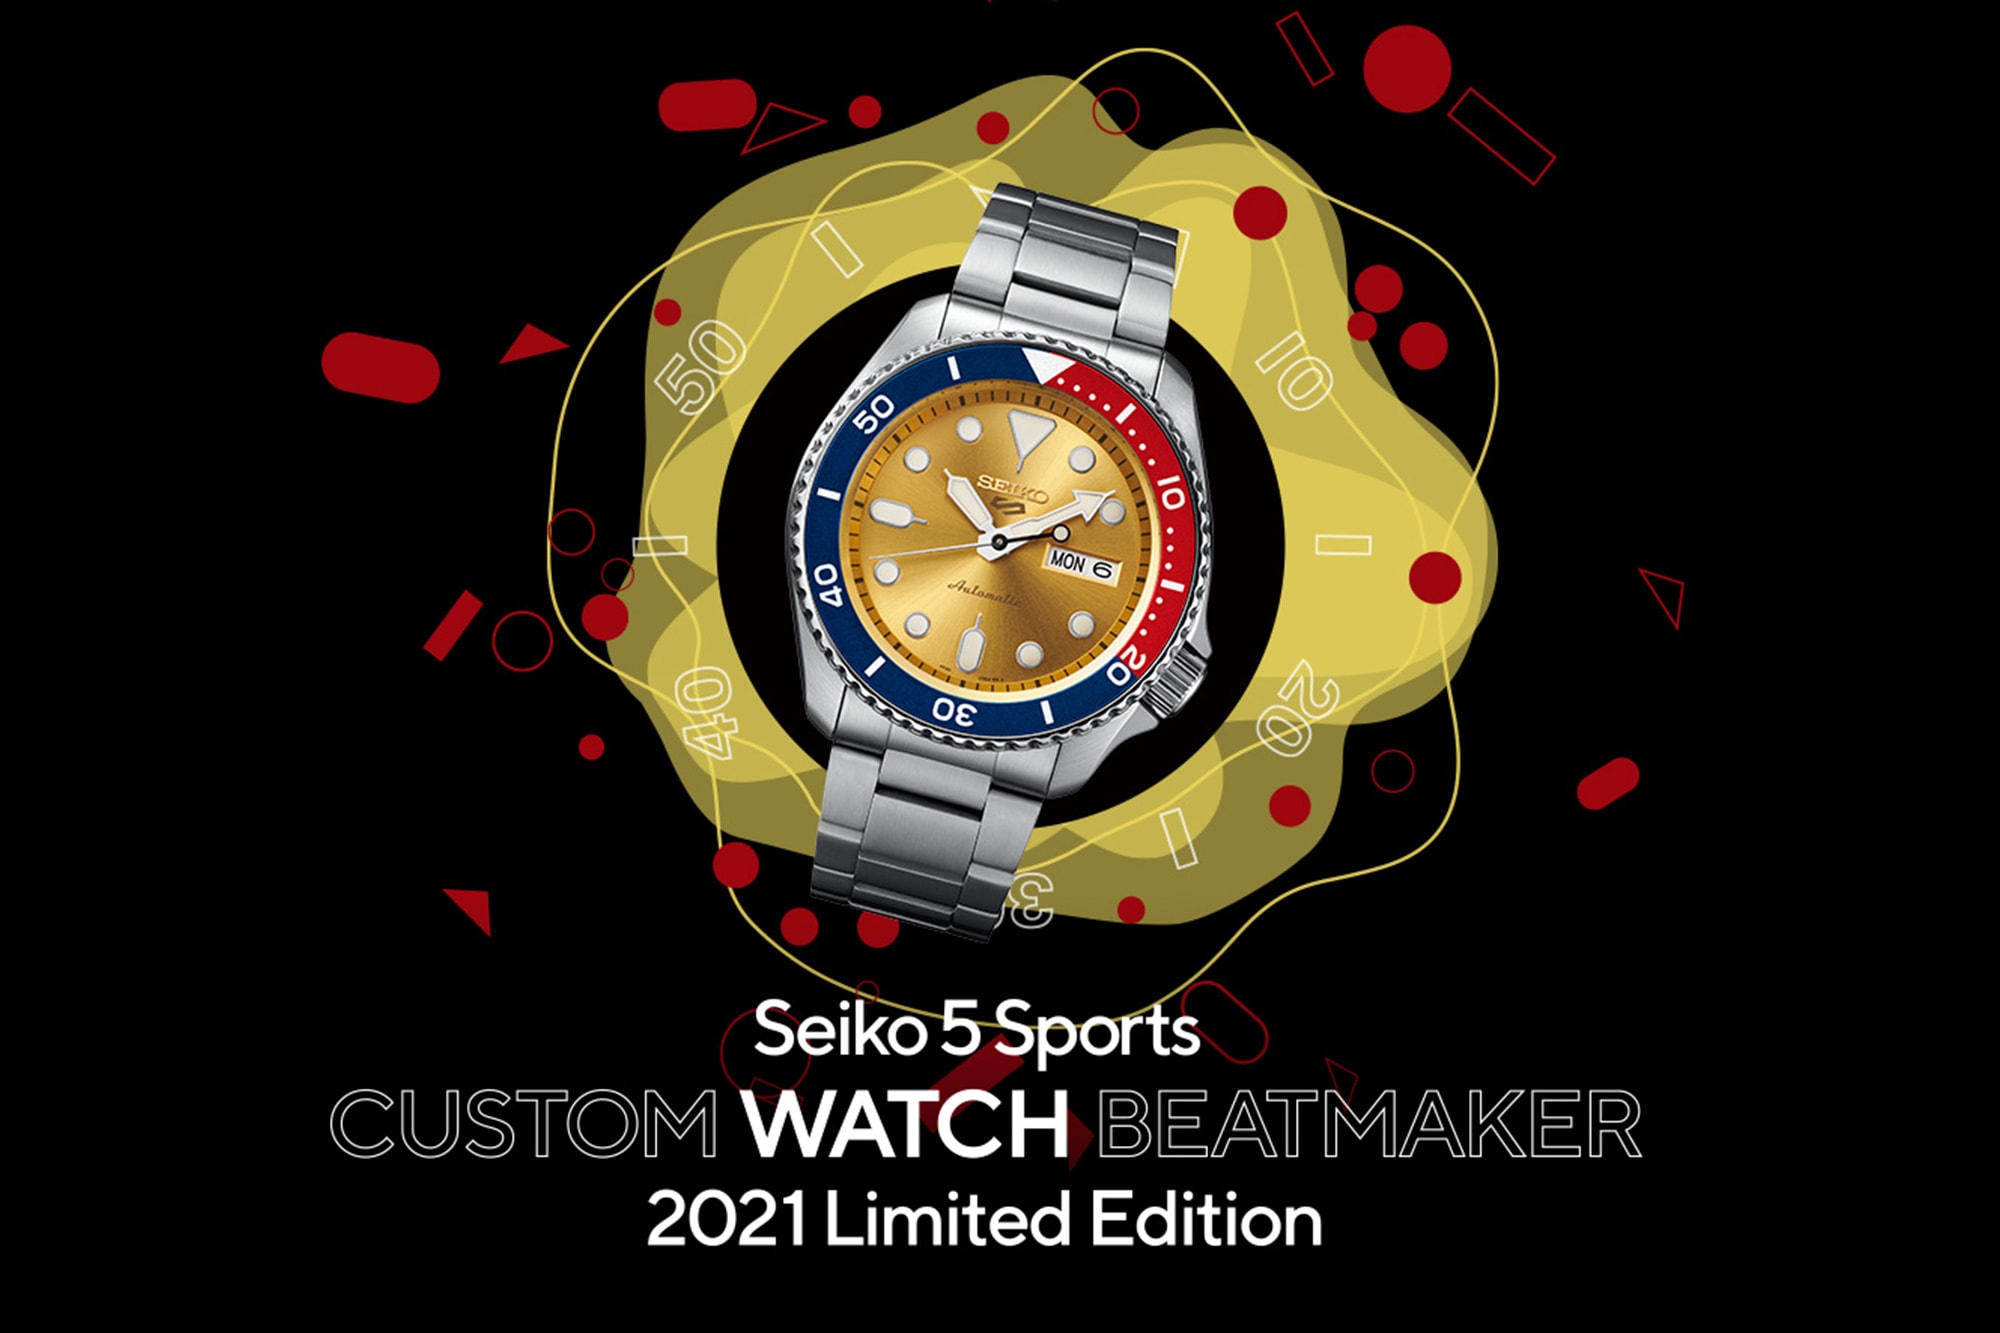 Introducing the Seiko 5 Sports Custom Watch Beatmaker Limited 